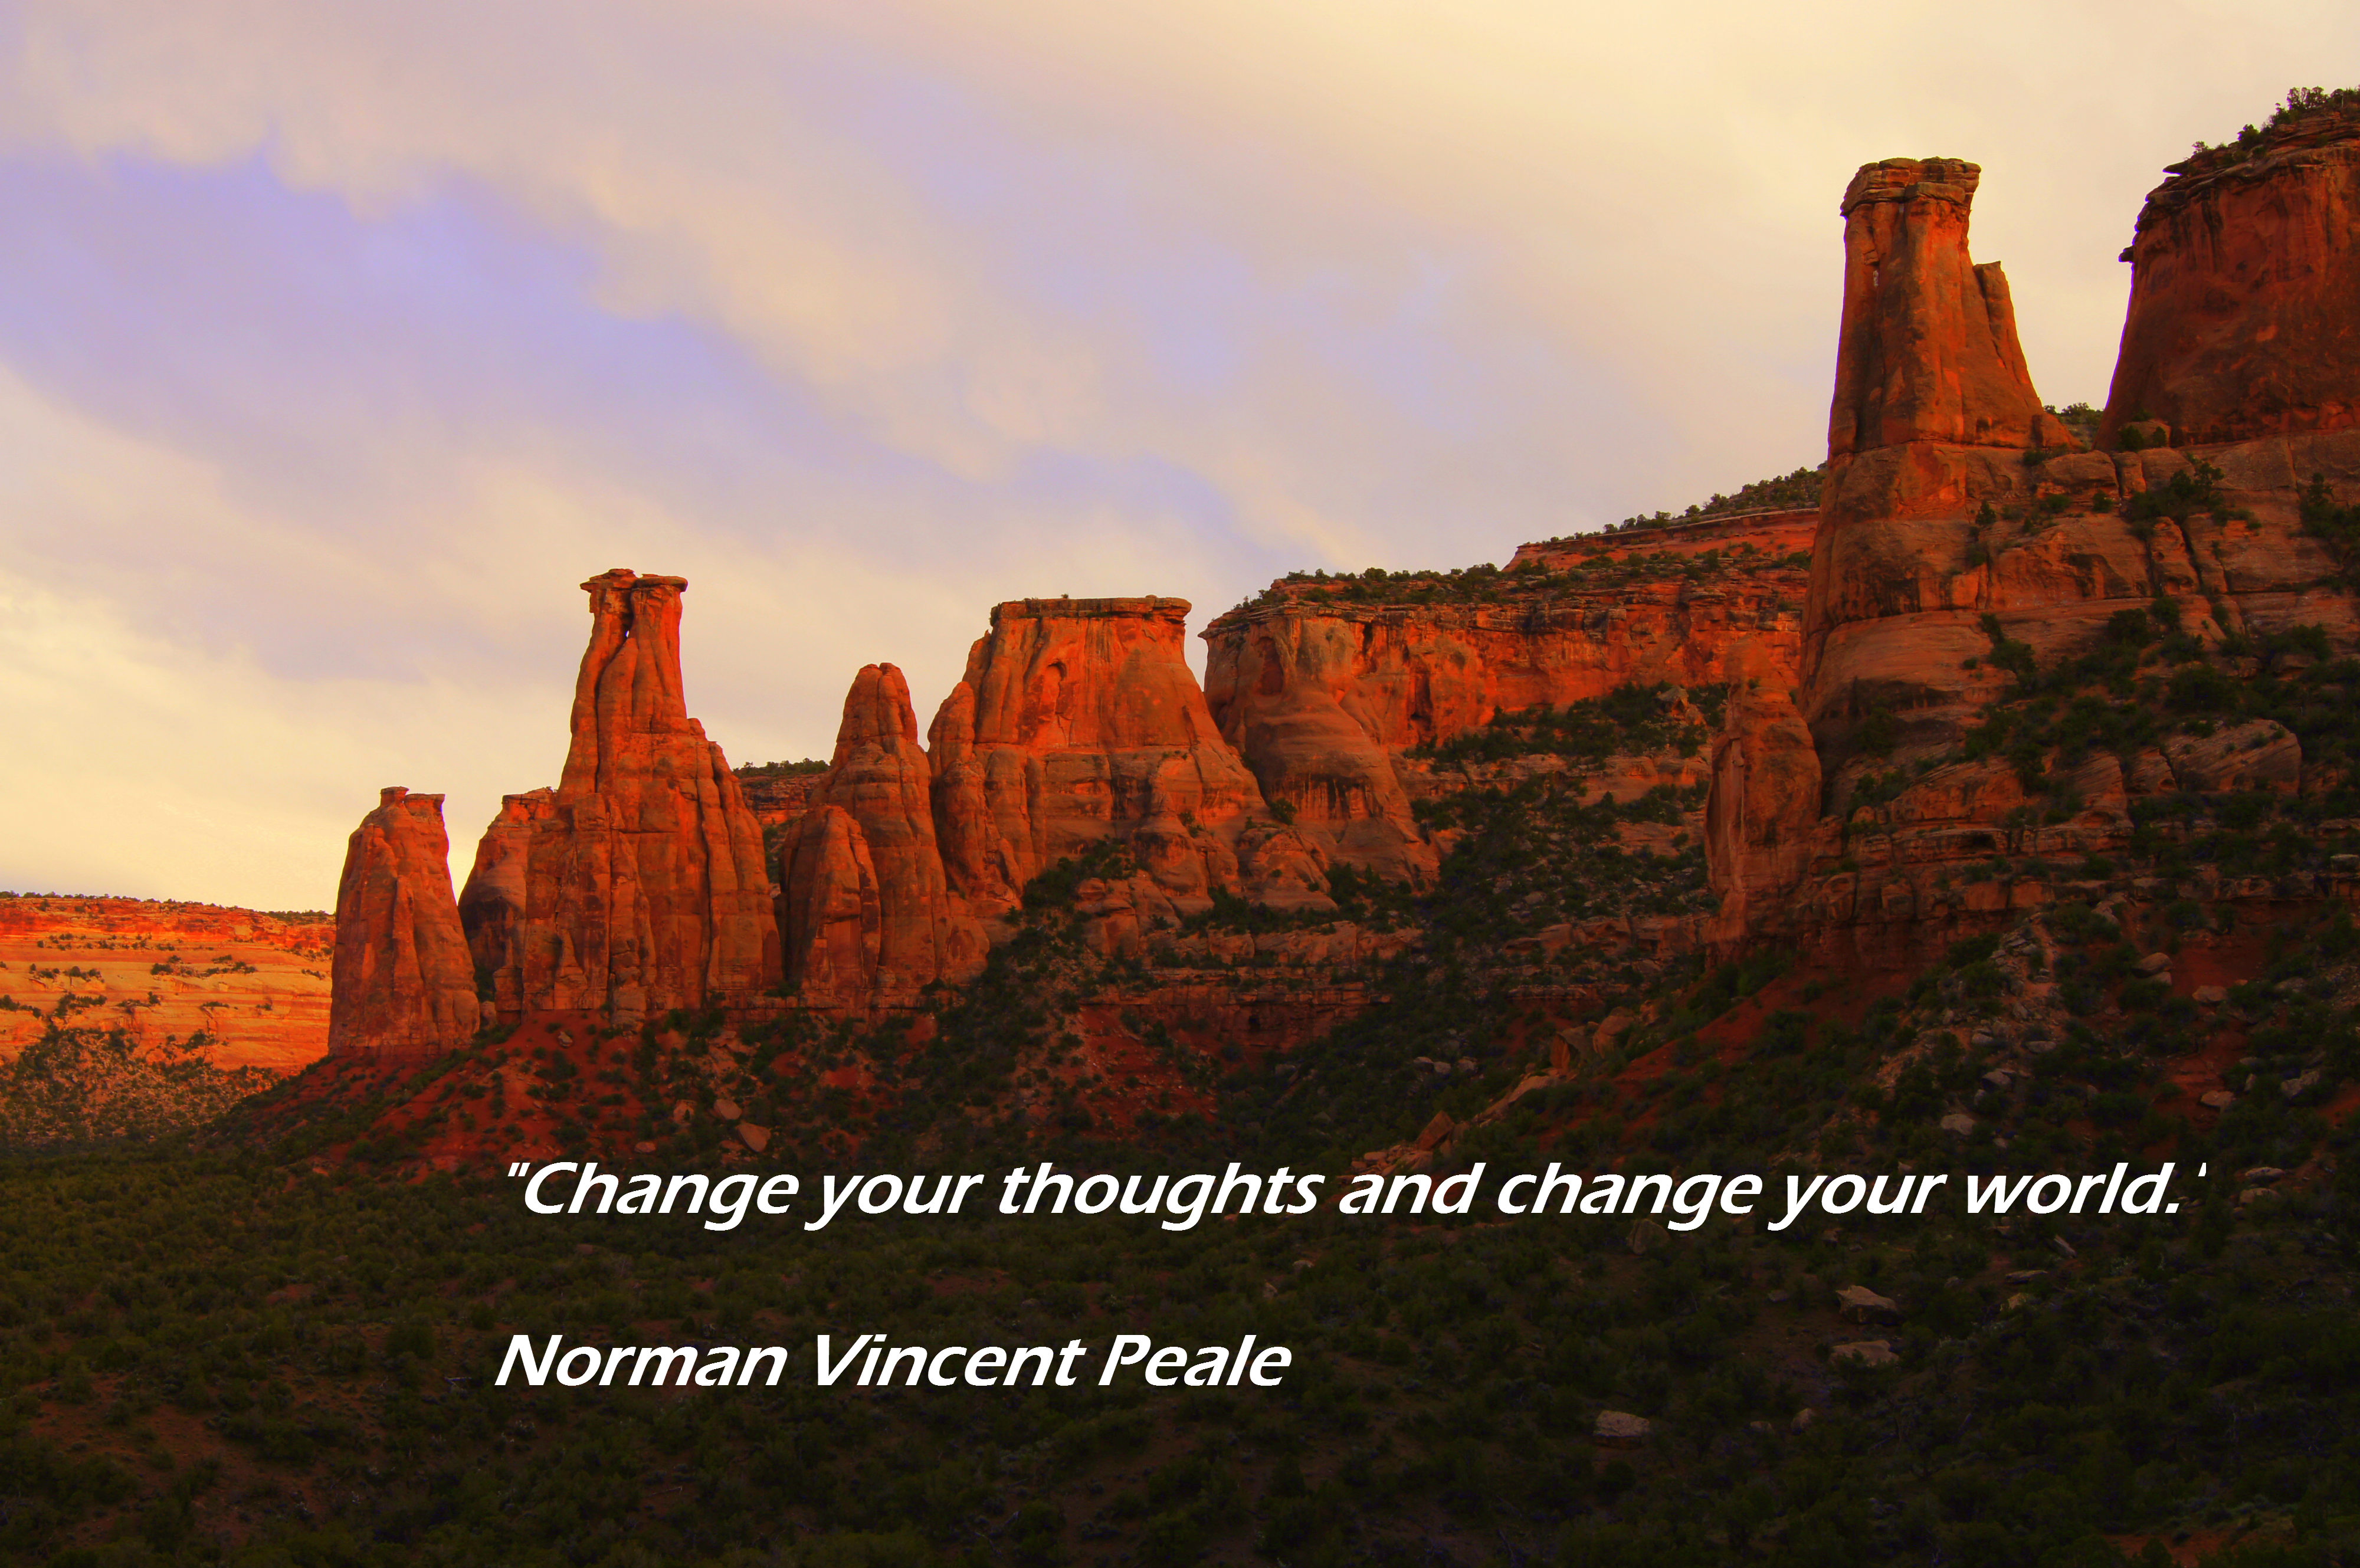 “Change your thoughts and change your world.”  Norman Vincent Peale